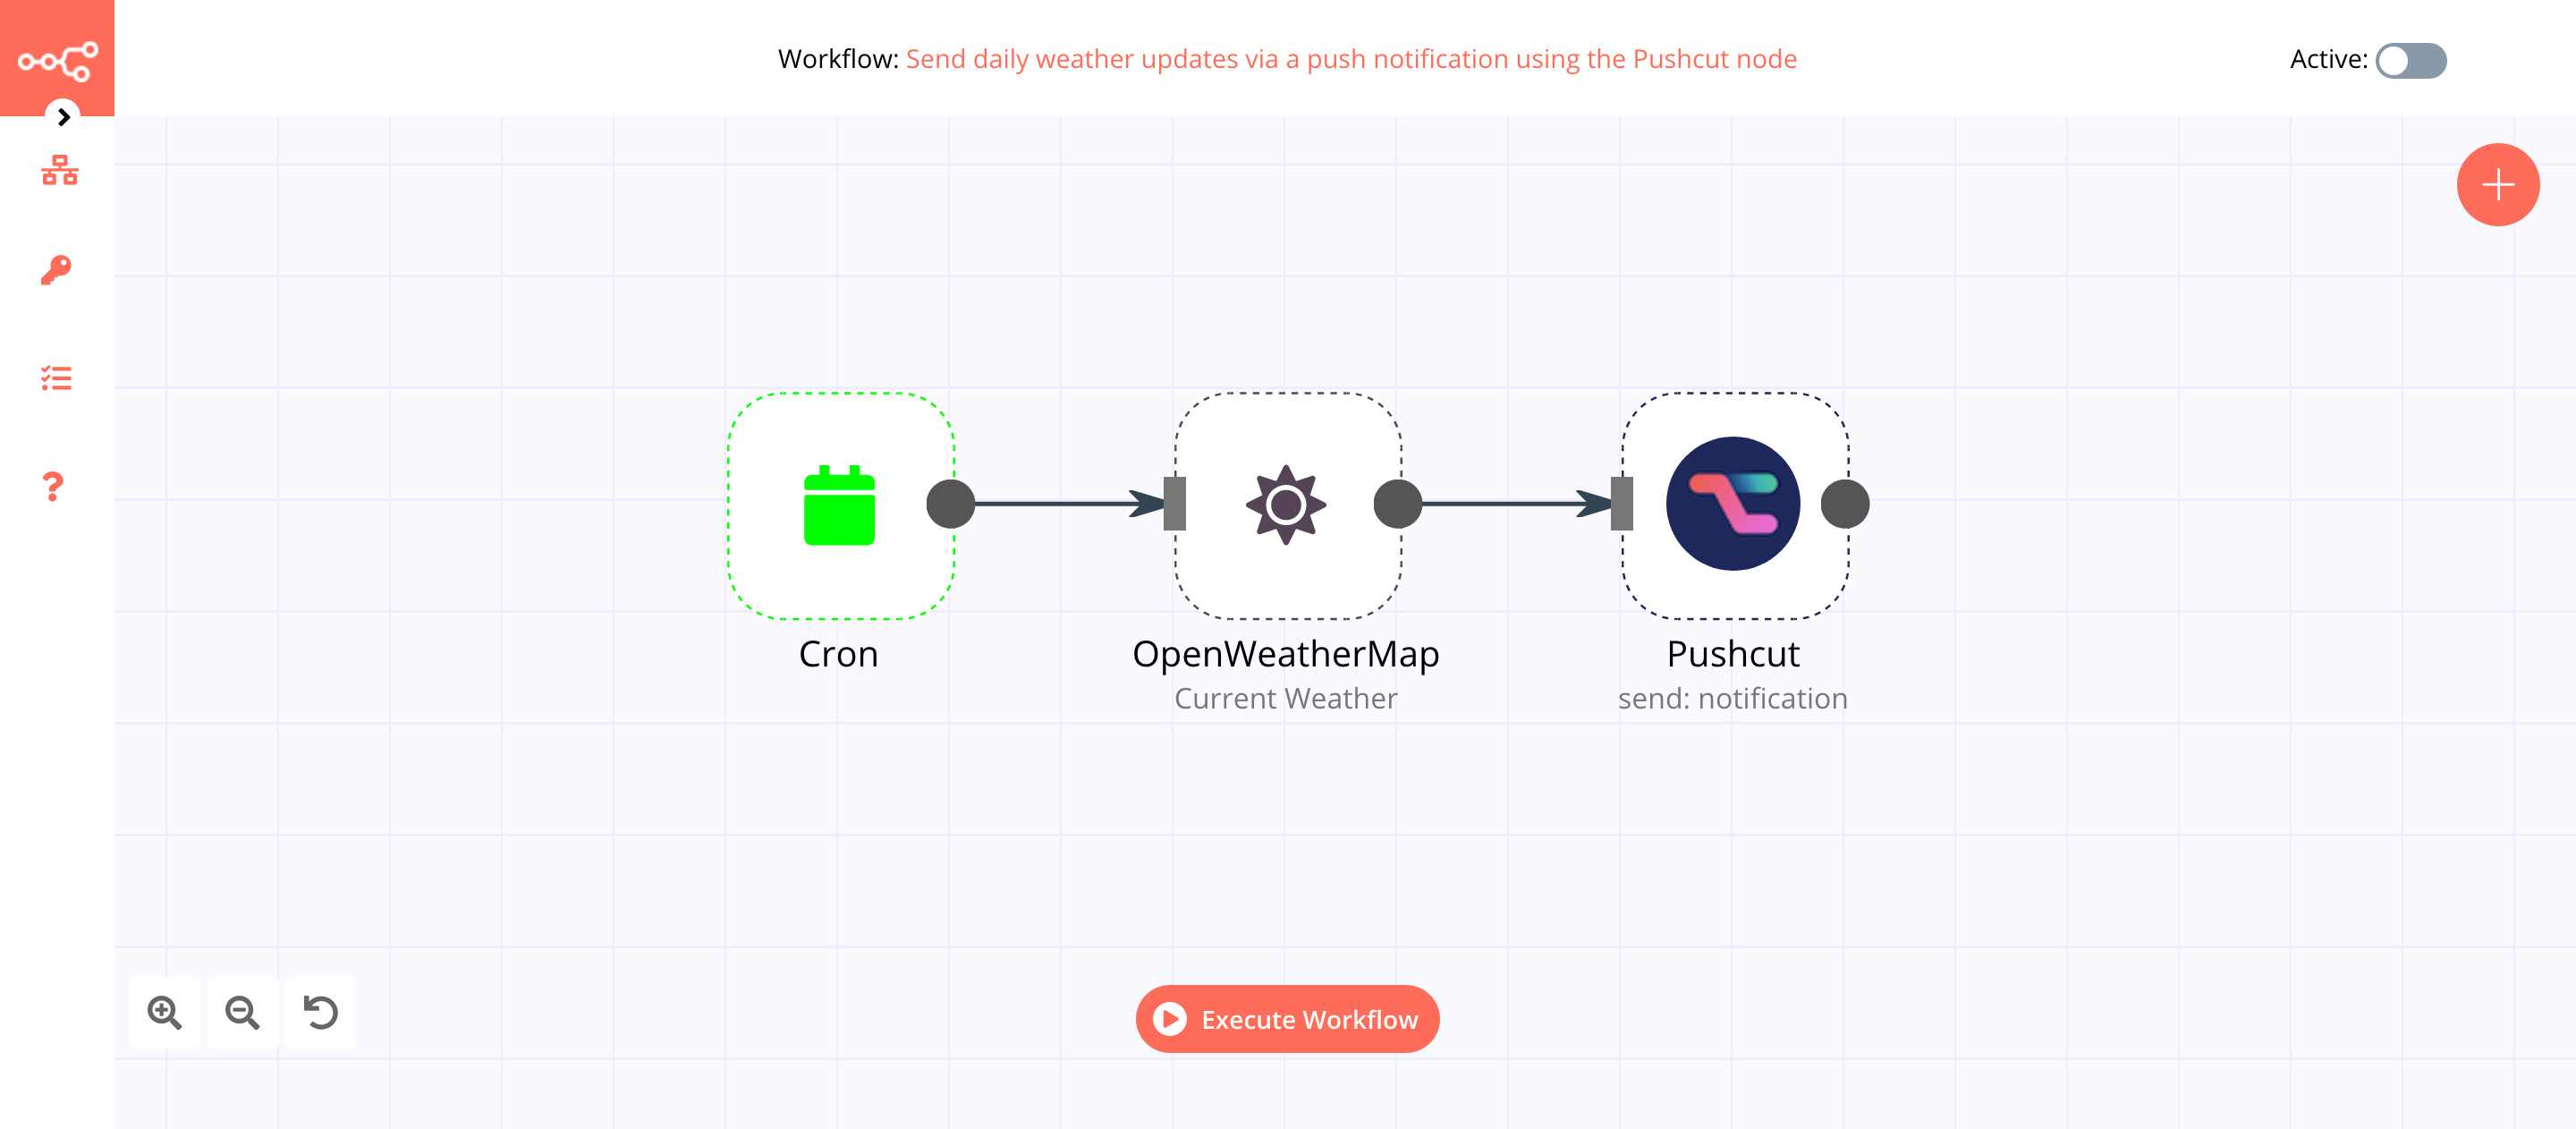 A workflow with the Pushcut node